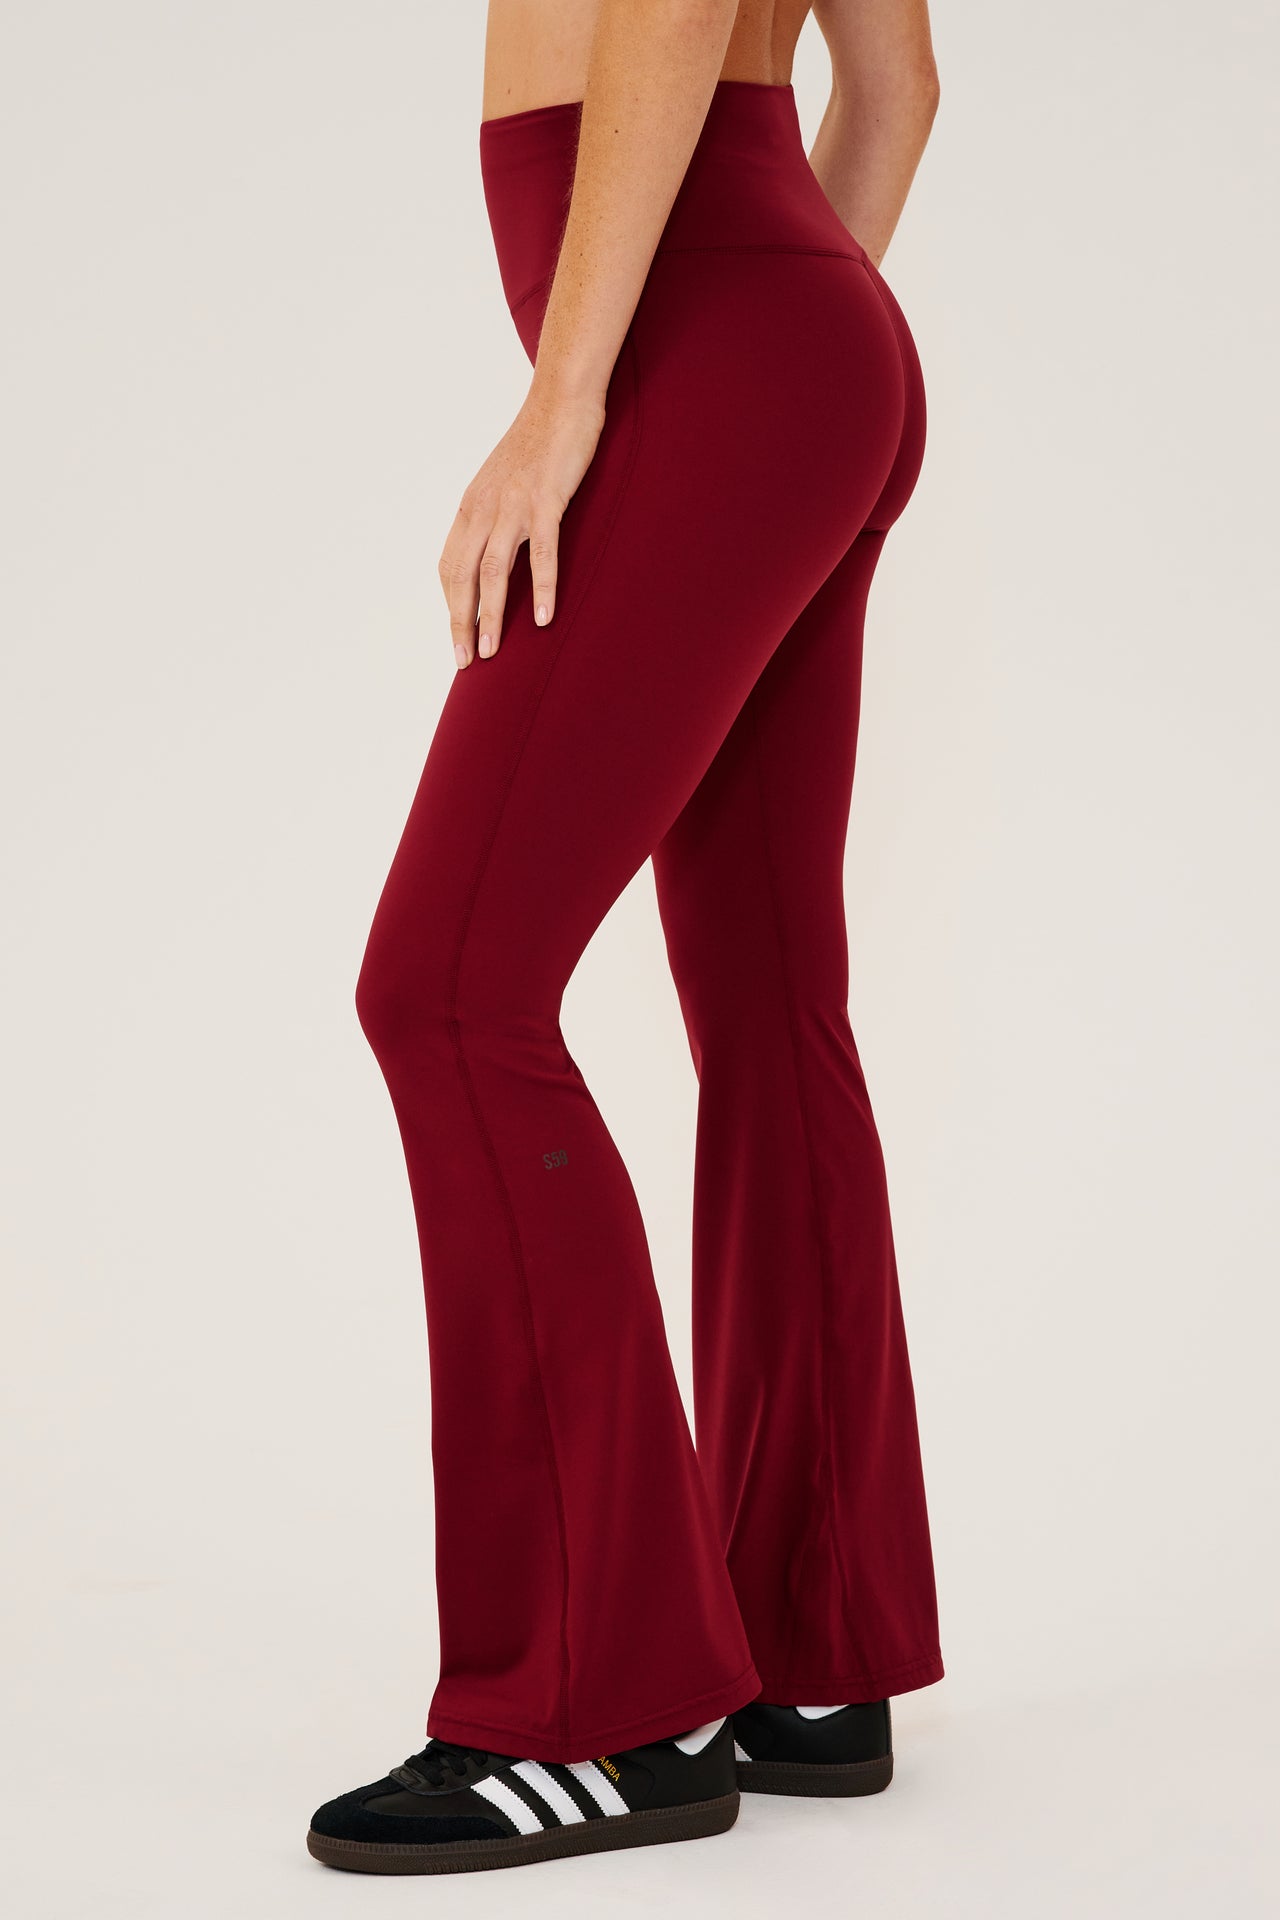 Side view of dark red high waist below  ankle length legging with wide flared bottoms with black S59 logo on back of left calf. Paired with black shoes with white stripes.